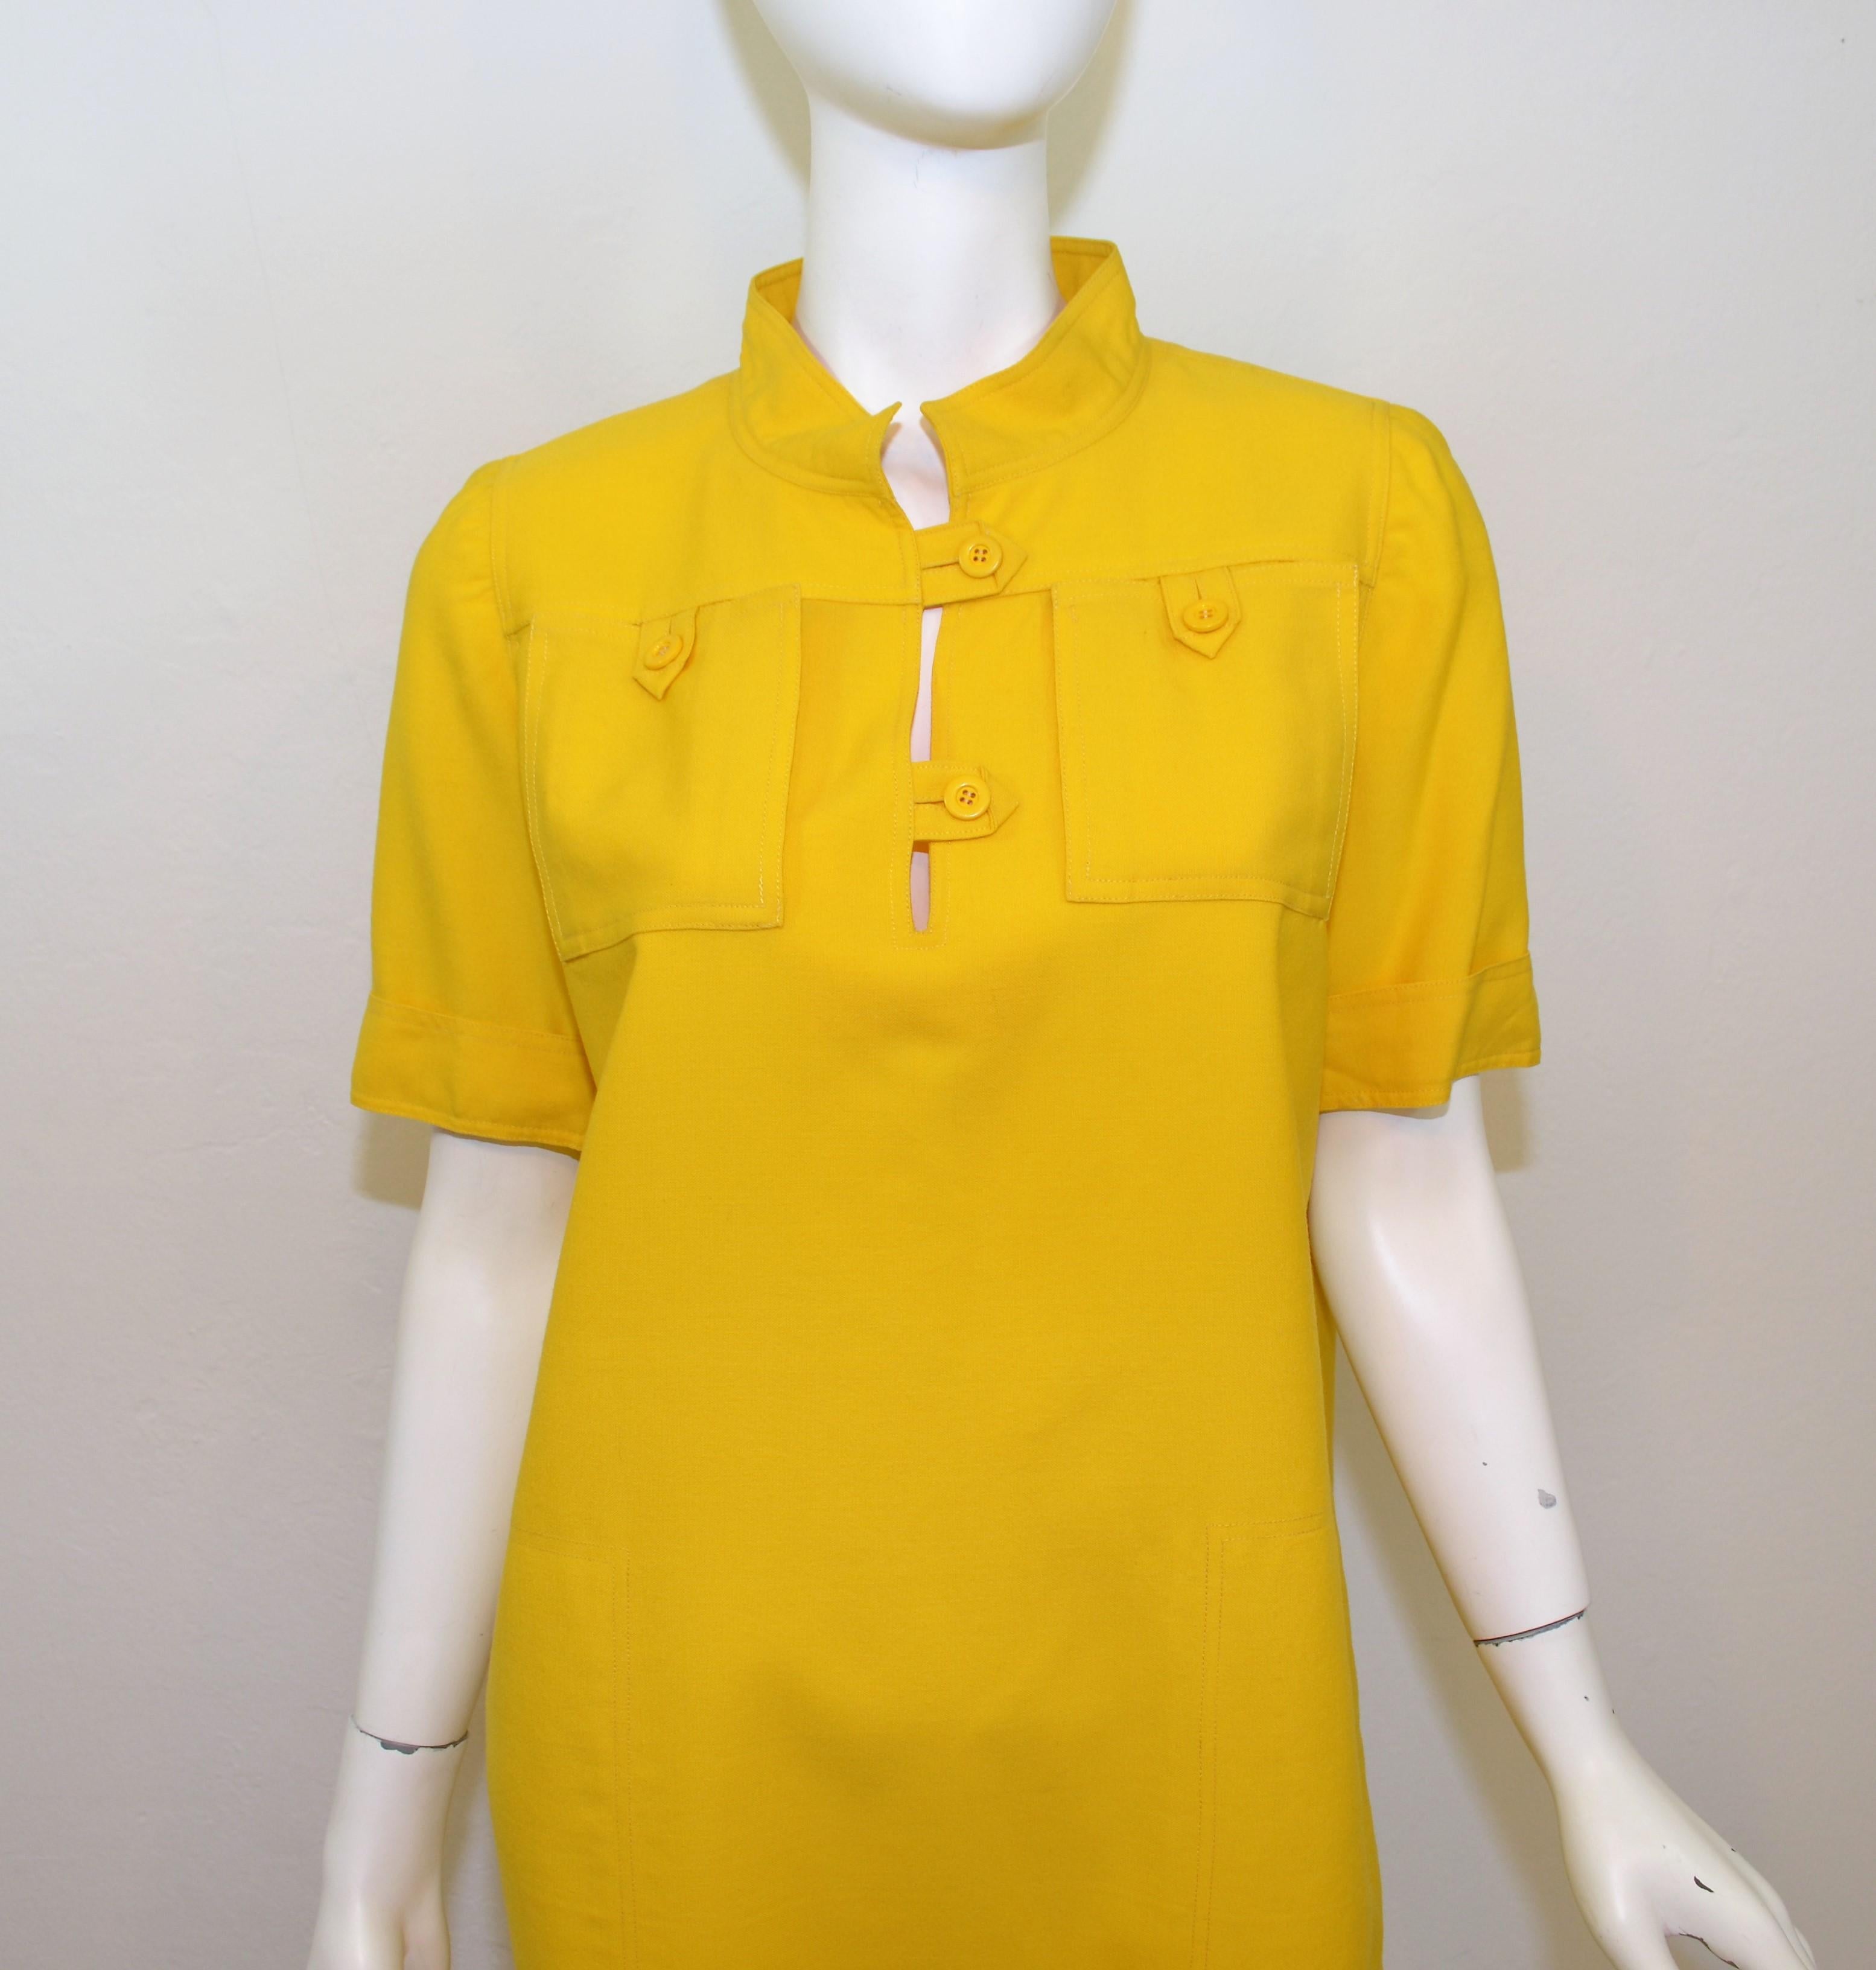 1970's Courreges Vintage Yellow Dress features buttoned pockets at the bust and button closures at the neck, vintage size B, made in France. 

Measurements:
Bust 42''
Waist 44''
Hips 46''
Length 37''